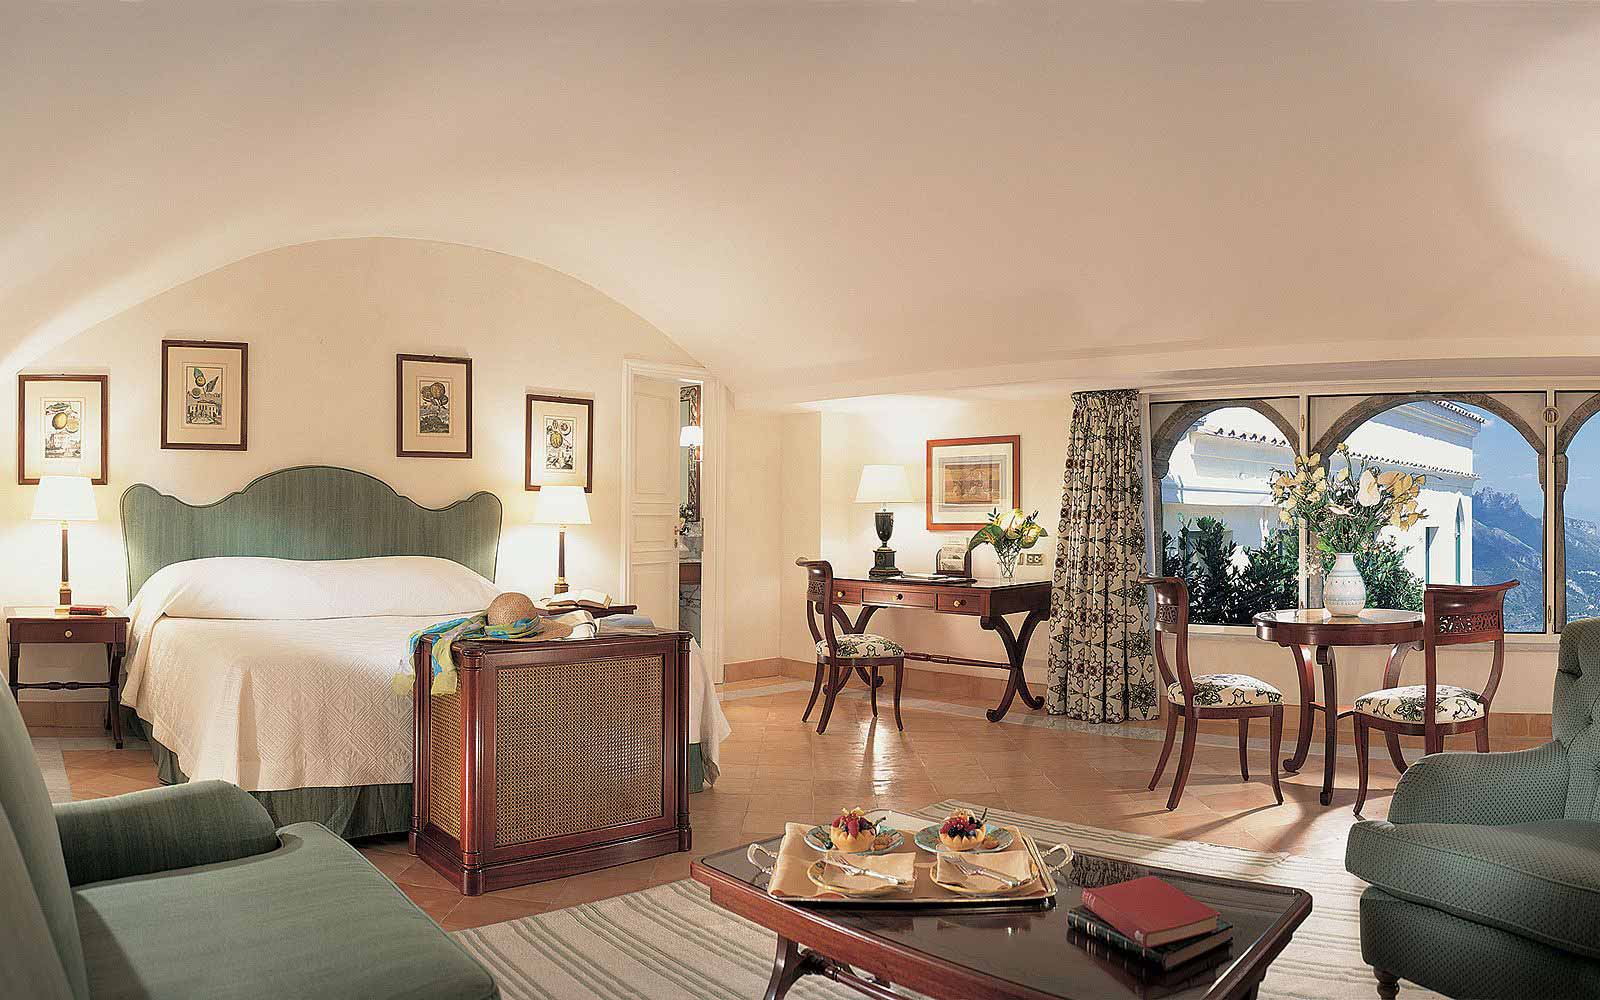 Deluxe Junior Suite with seaview at the Belmond Hotel Caruso